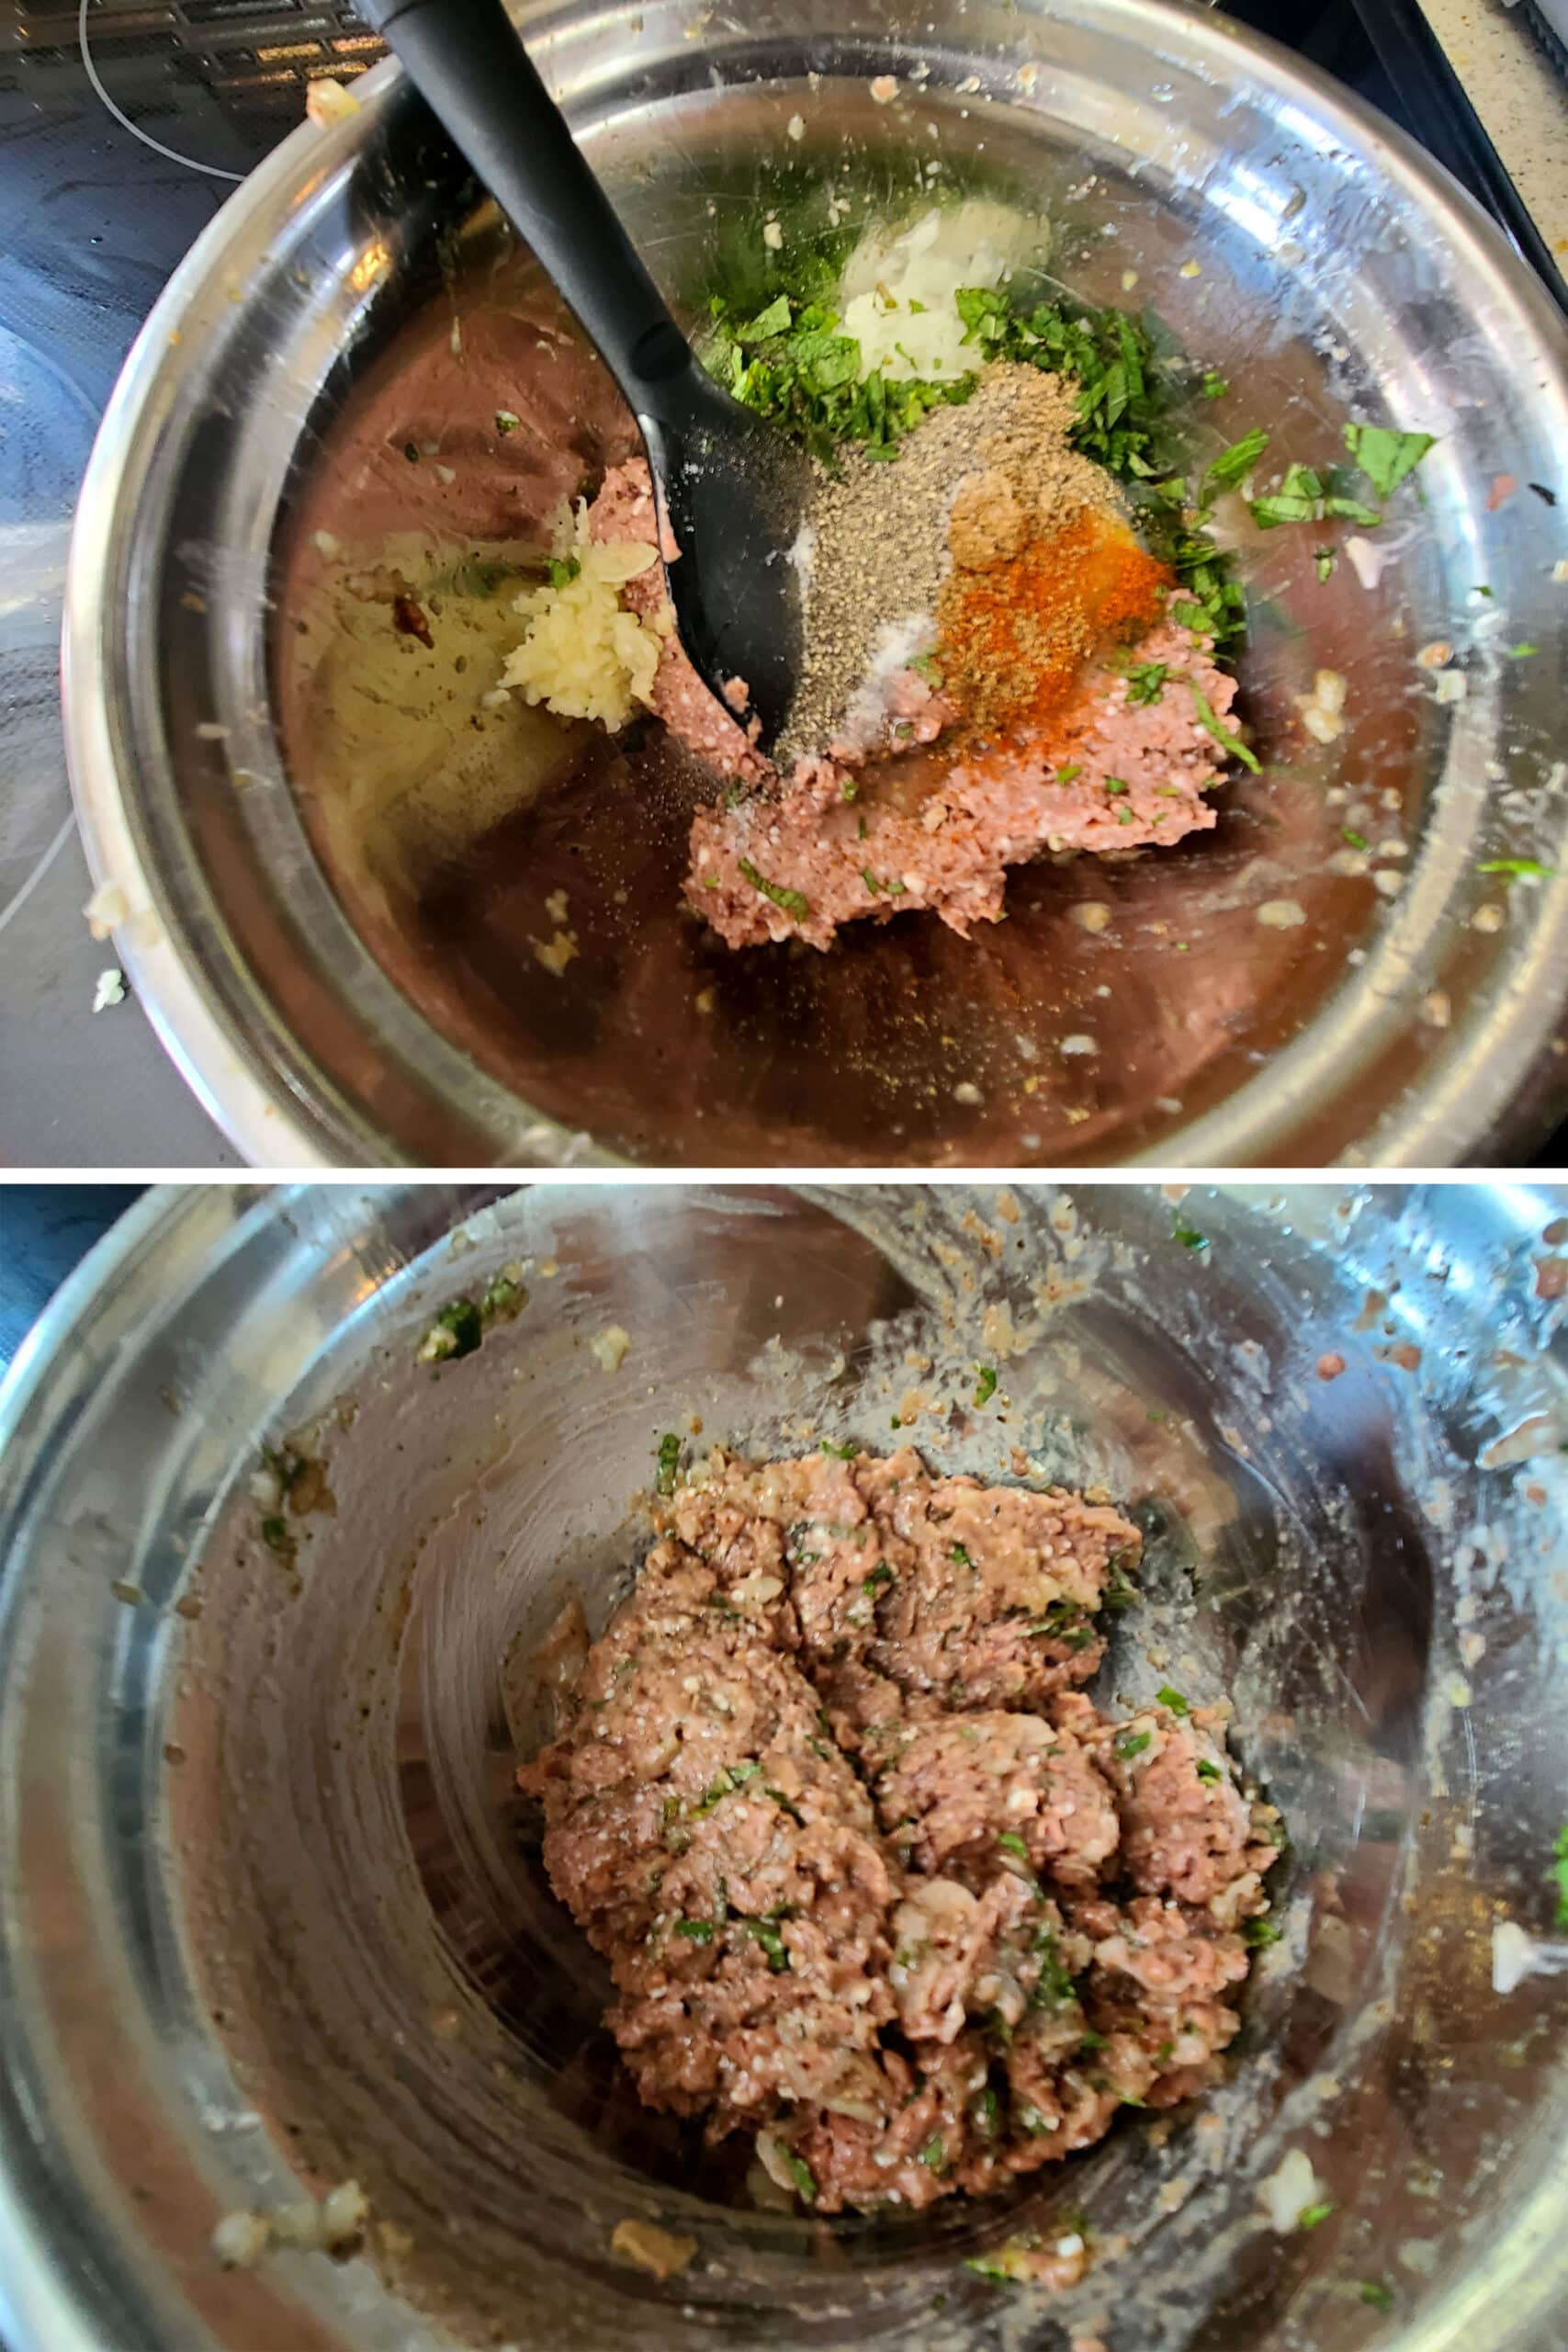 A 2 part image showing the meat substitute being mixed with the remaining ingredients.